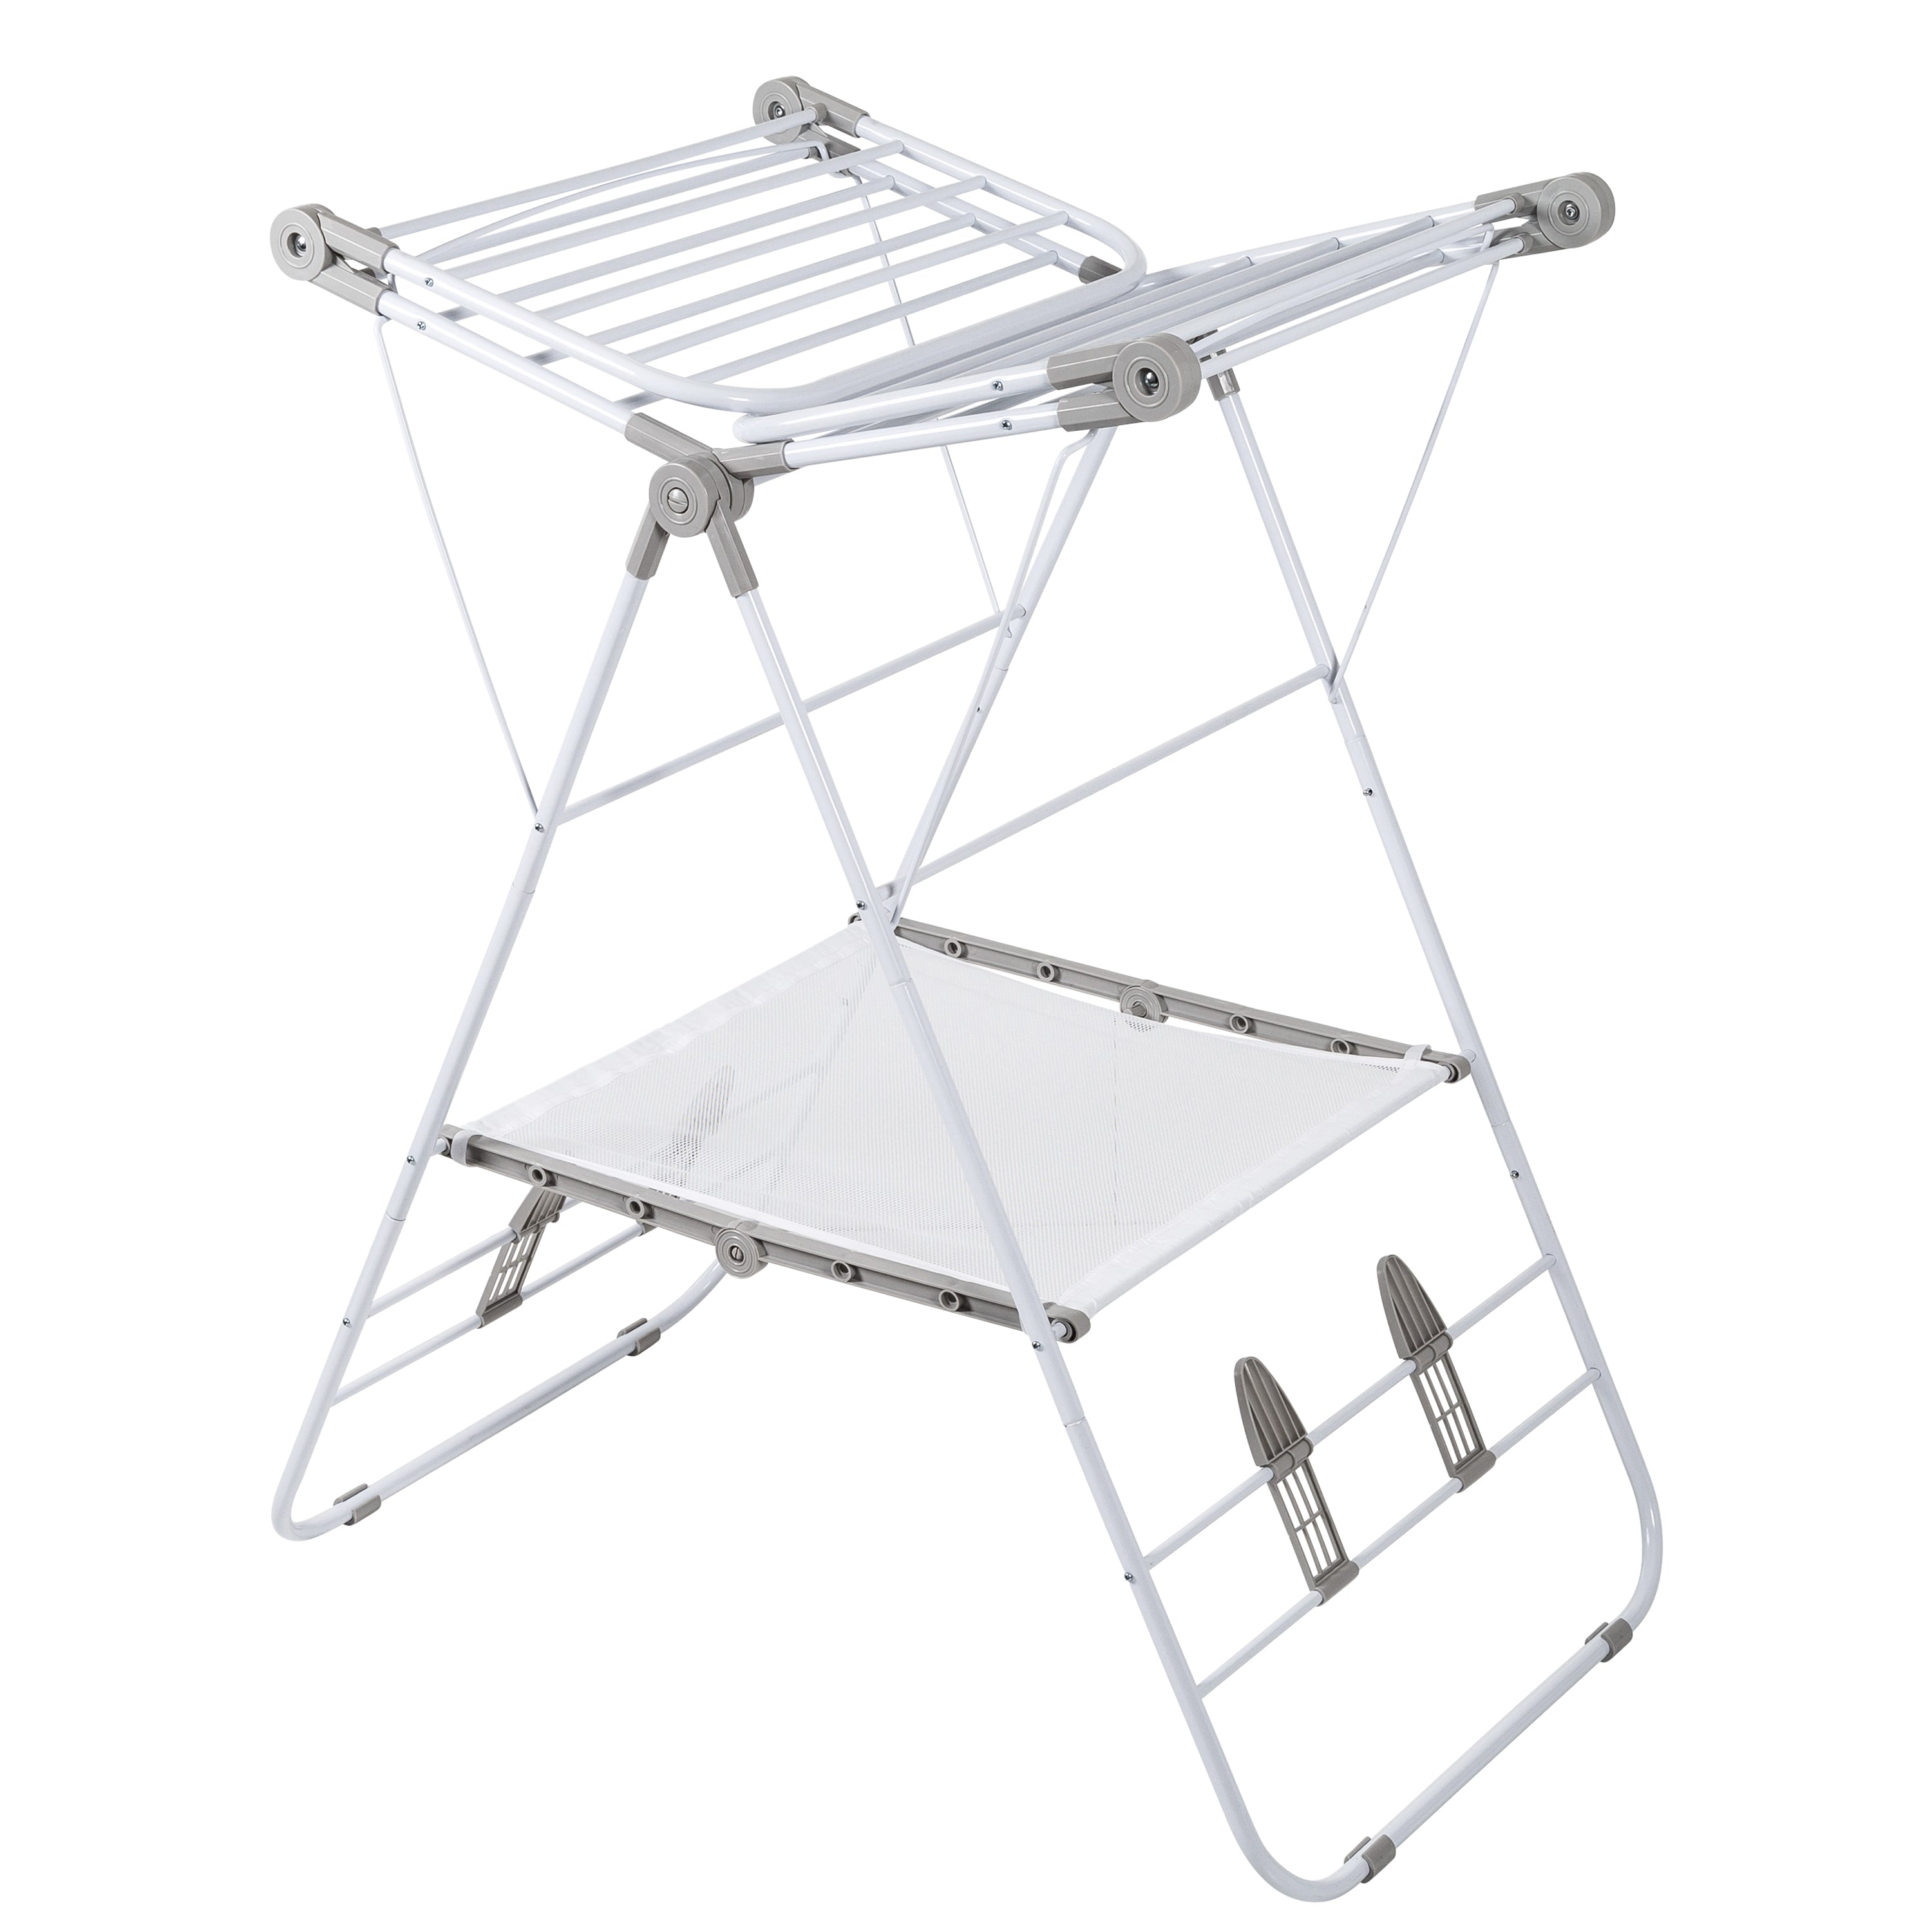 Wall Mounted Clothes Drying Rack - Heavy Duty (Made in Usa) - Small